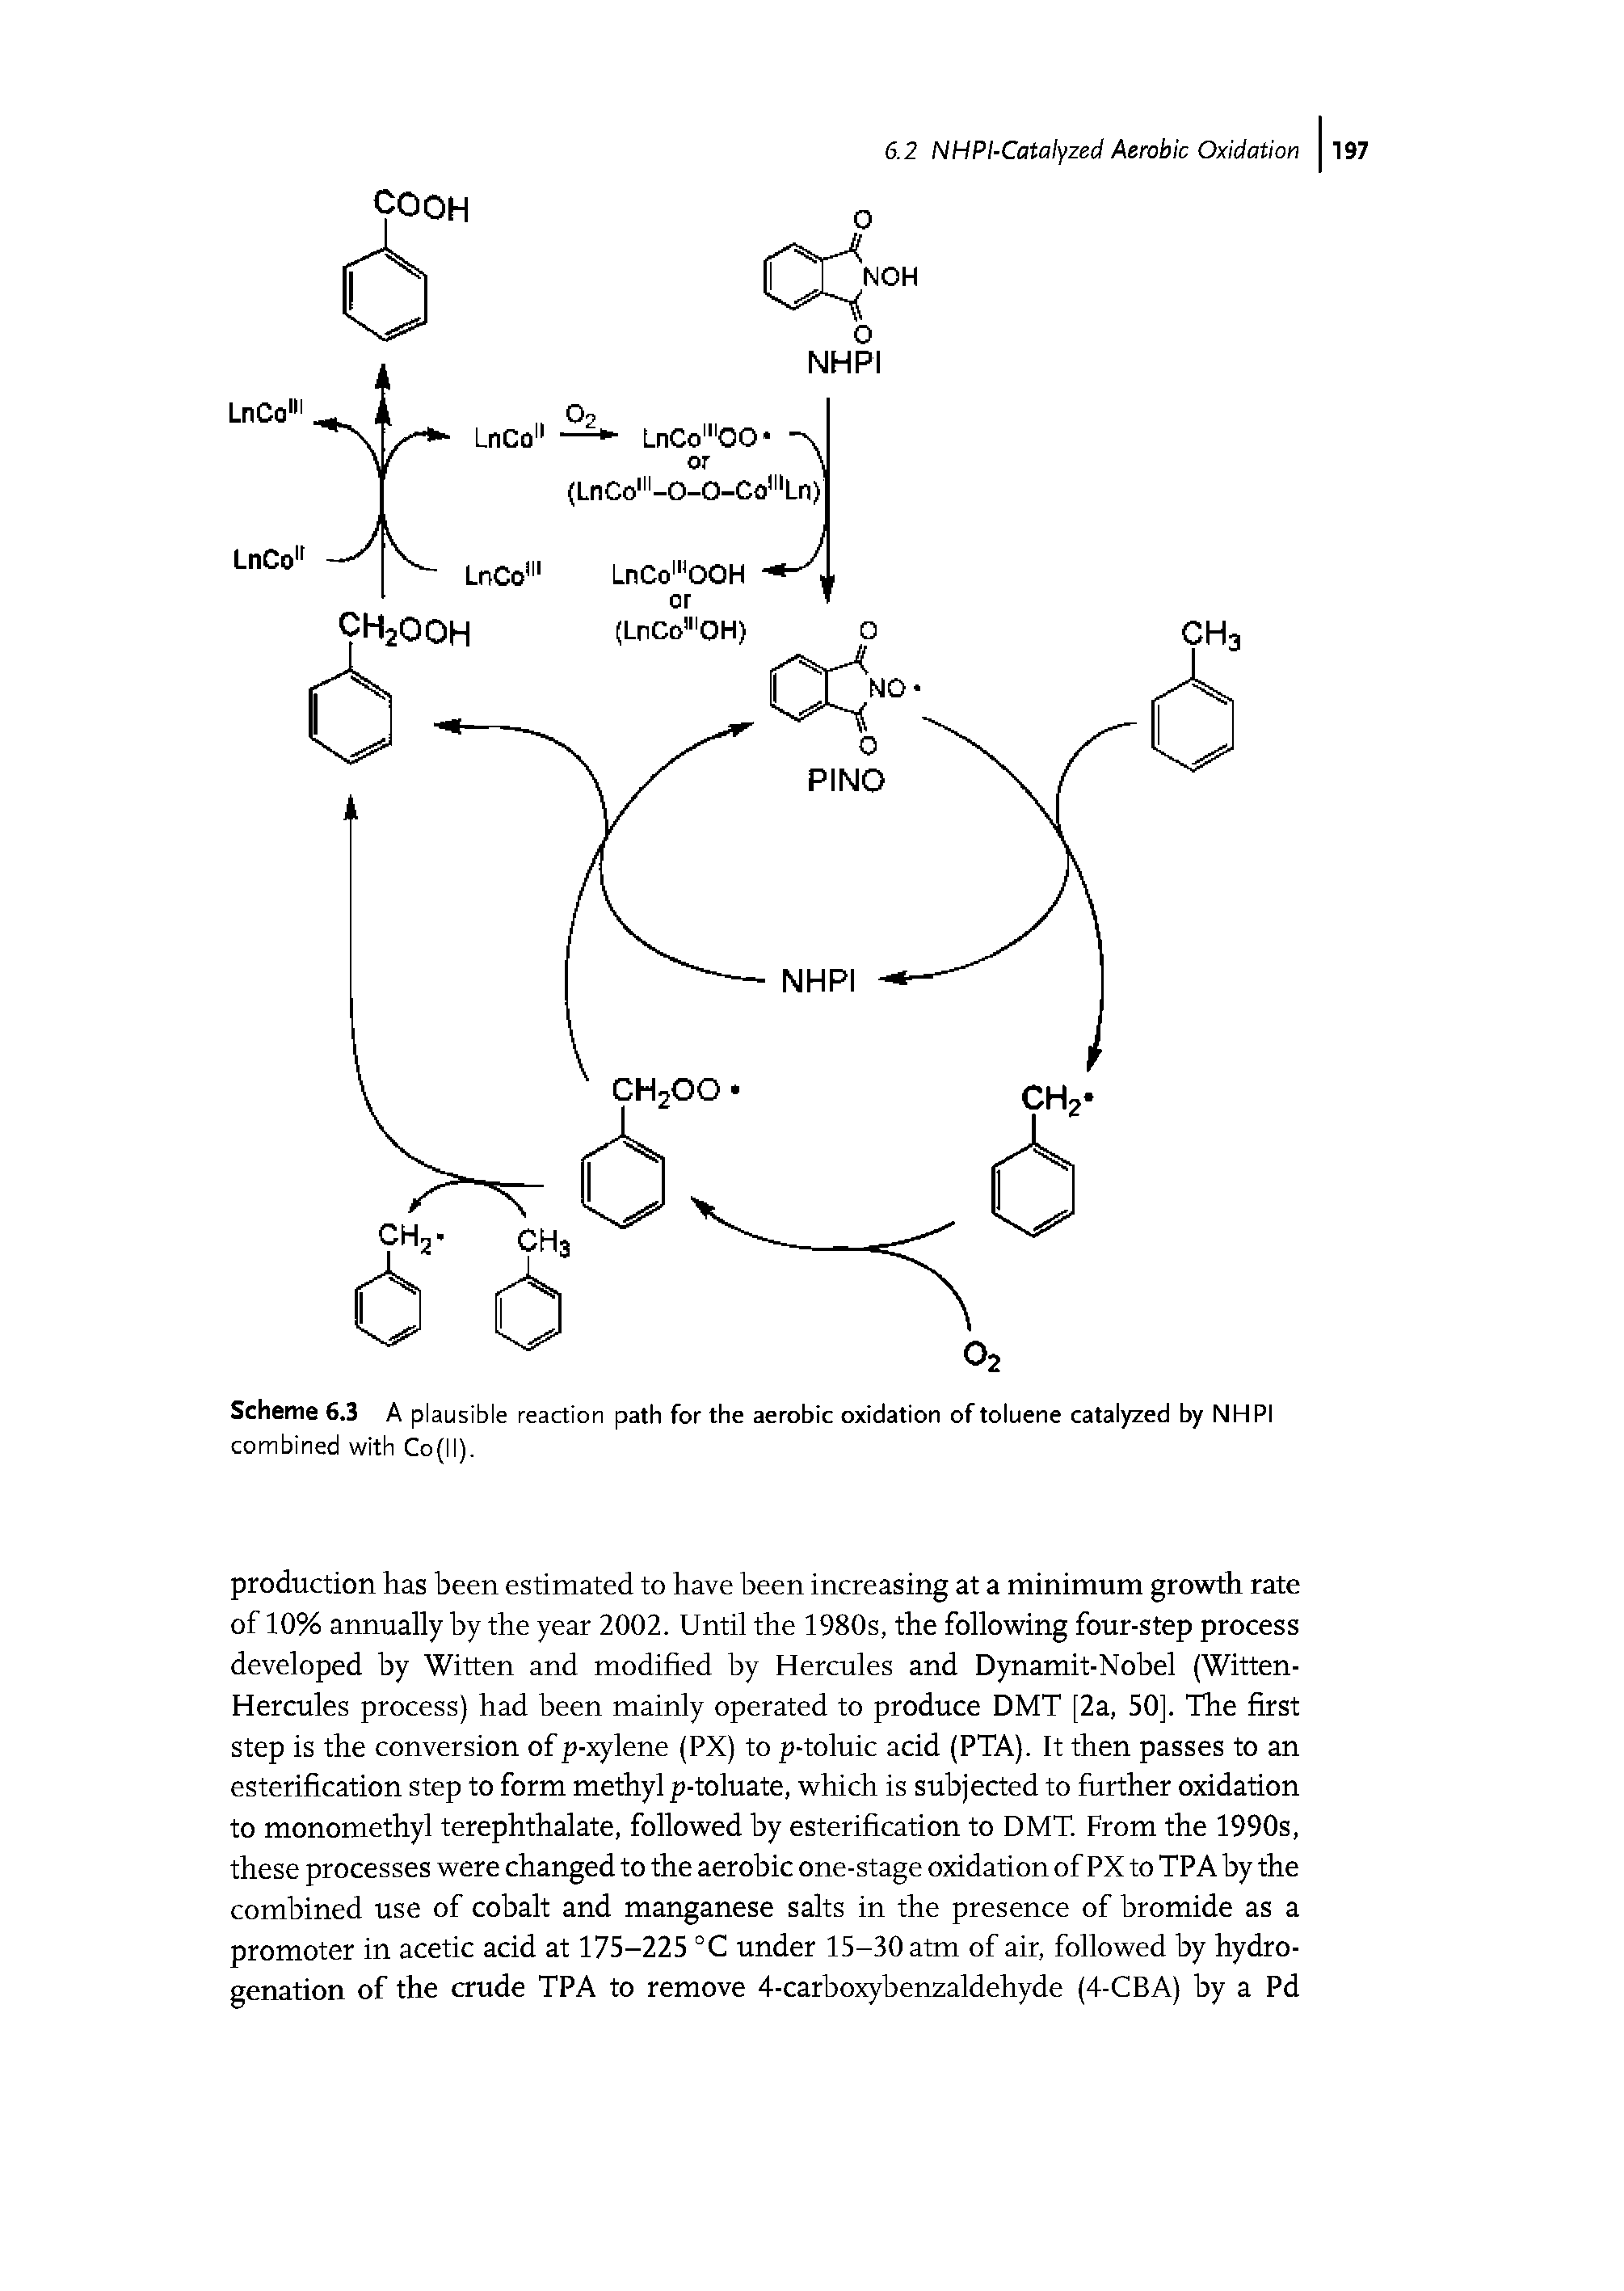 Scheme 6.3 A plausible reaction path for the aerobic oxidation of toluene catalyzed by NHPI combined with Co(ll).